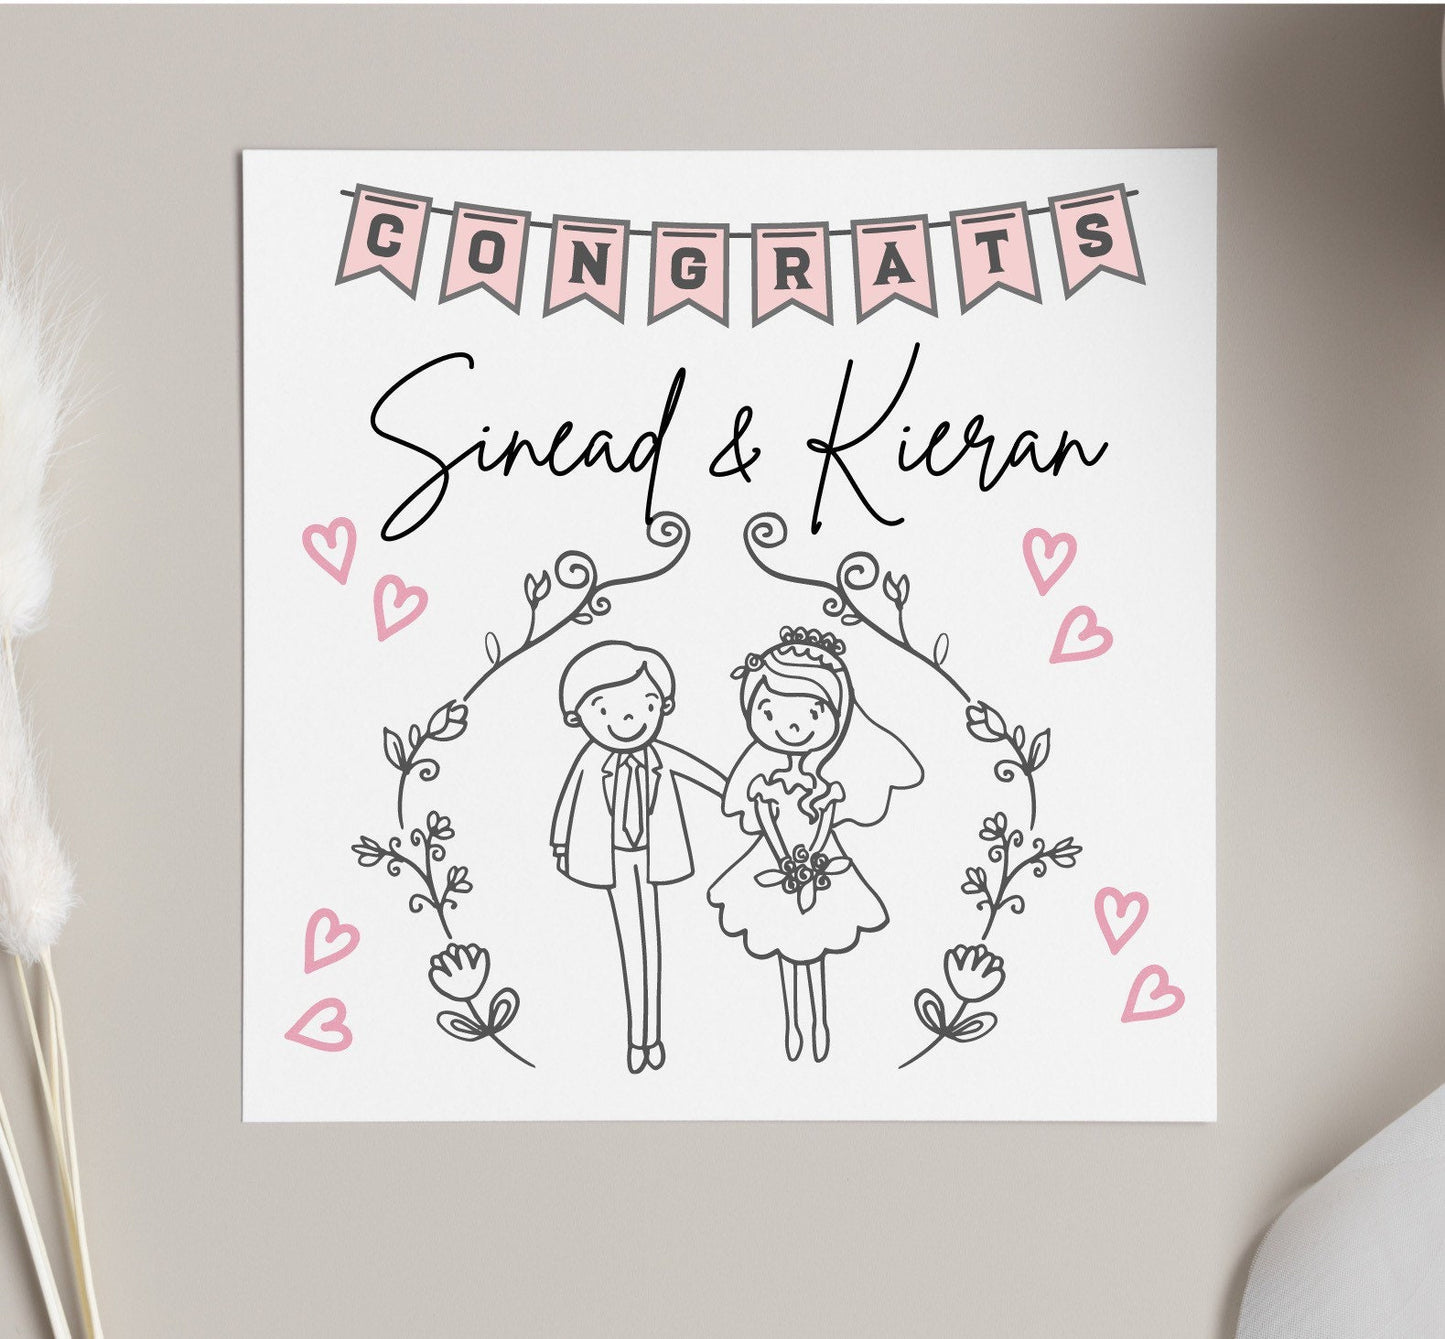 Congrats on your wedding day card, personalised wedding day card, BFF getting married, friend wedding card